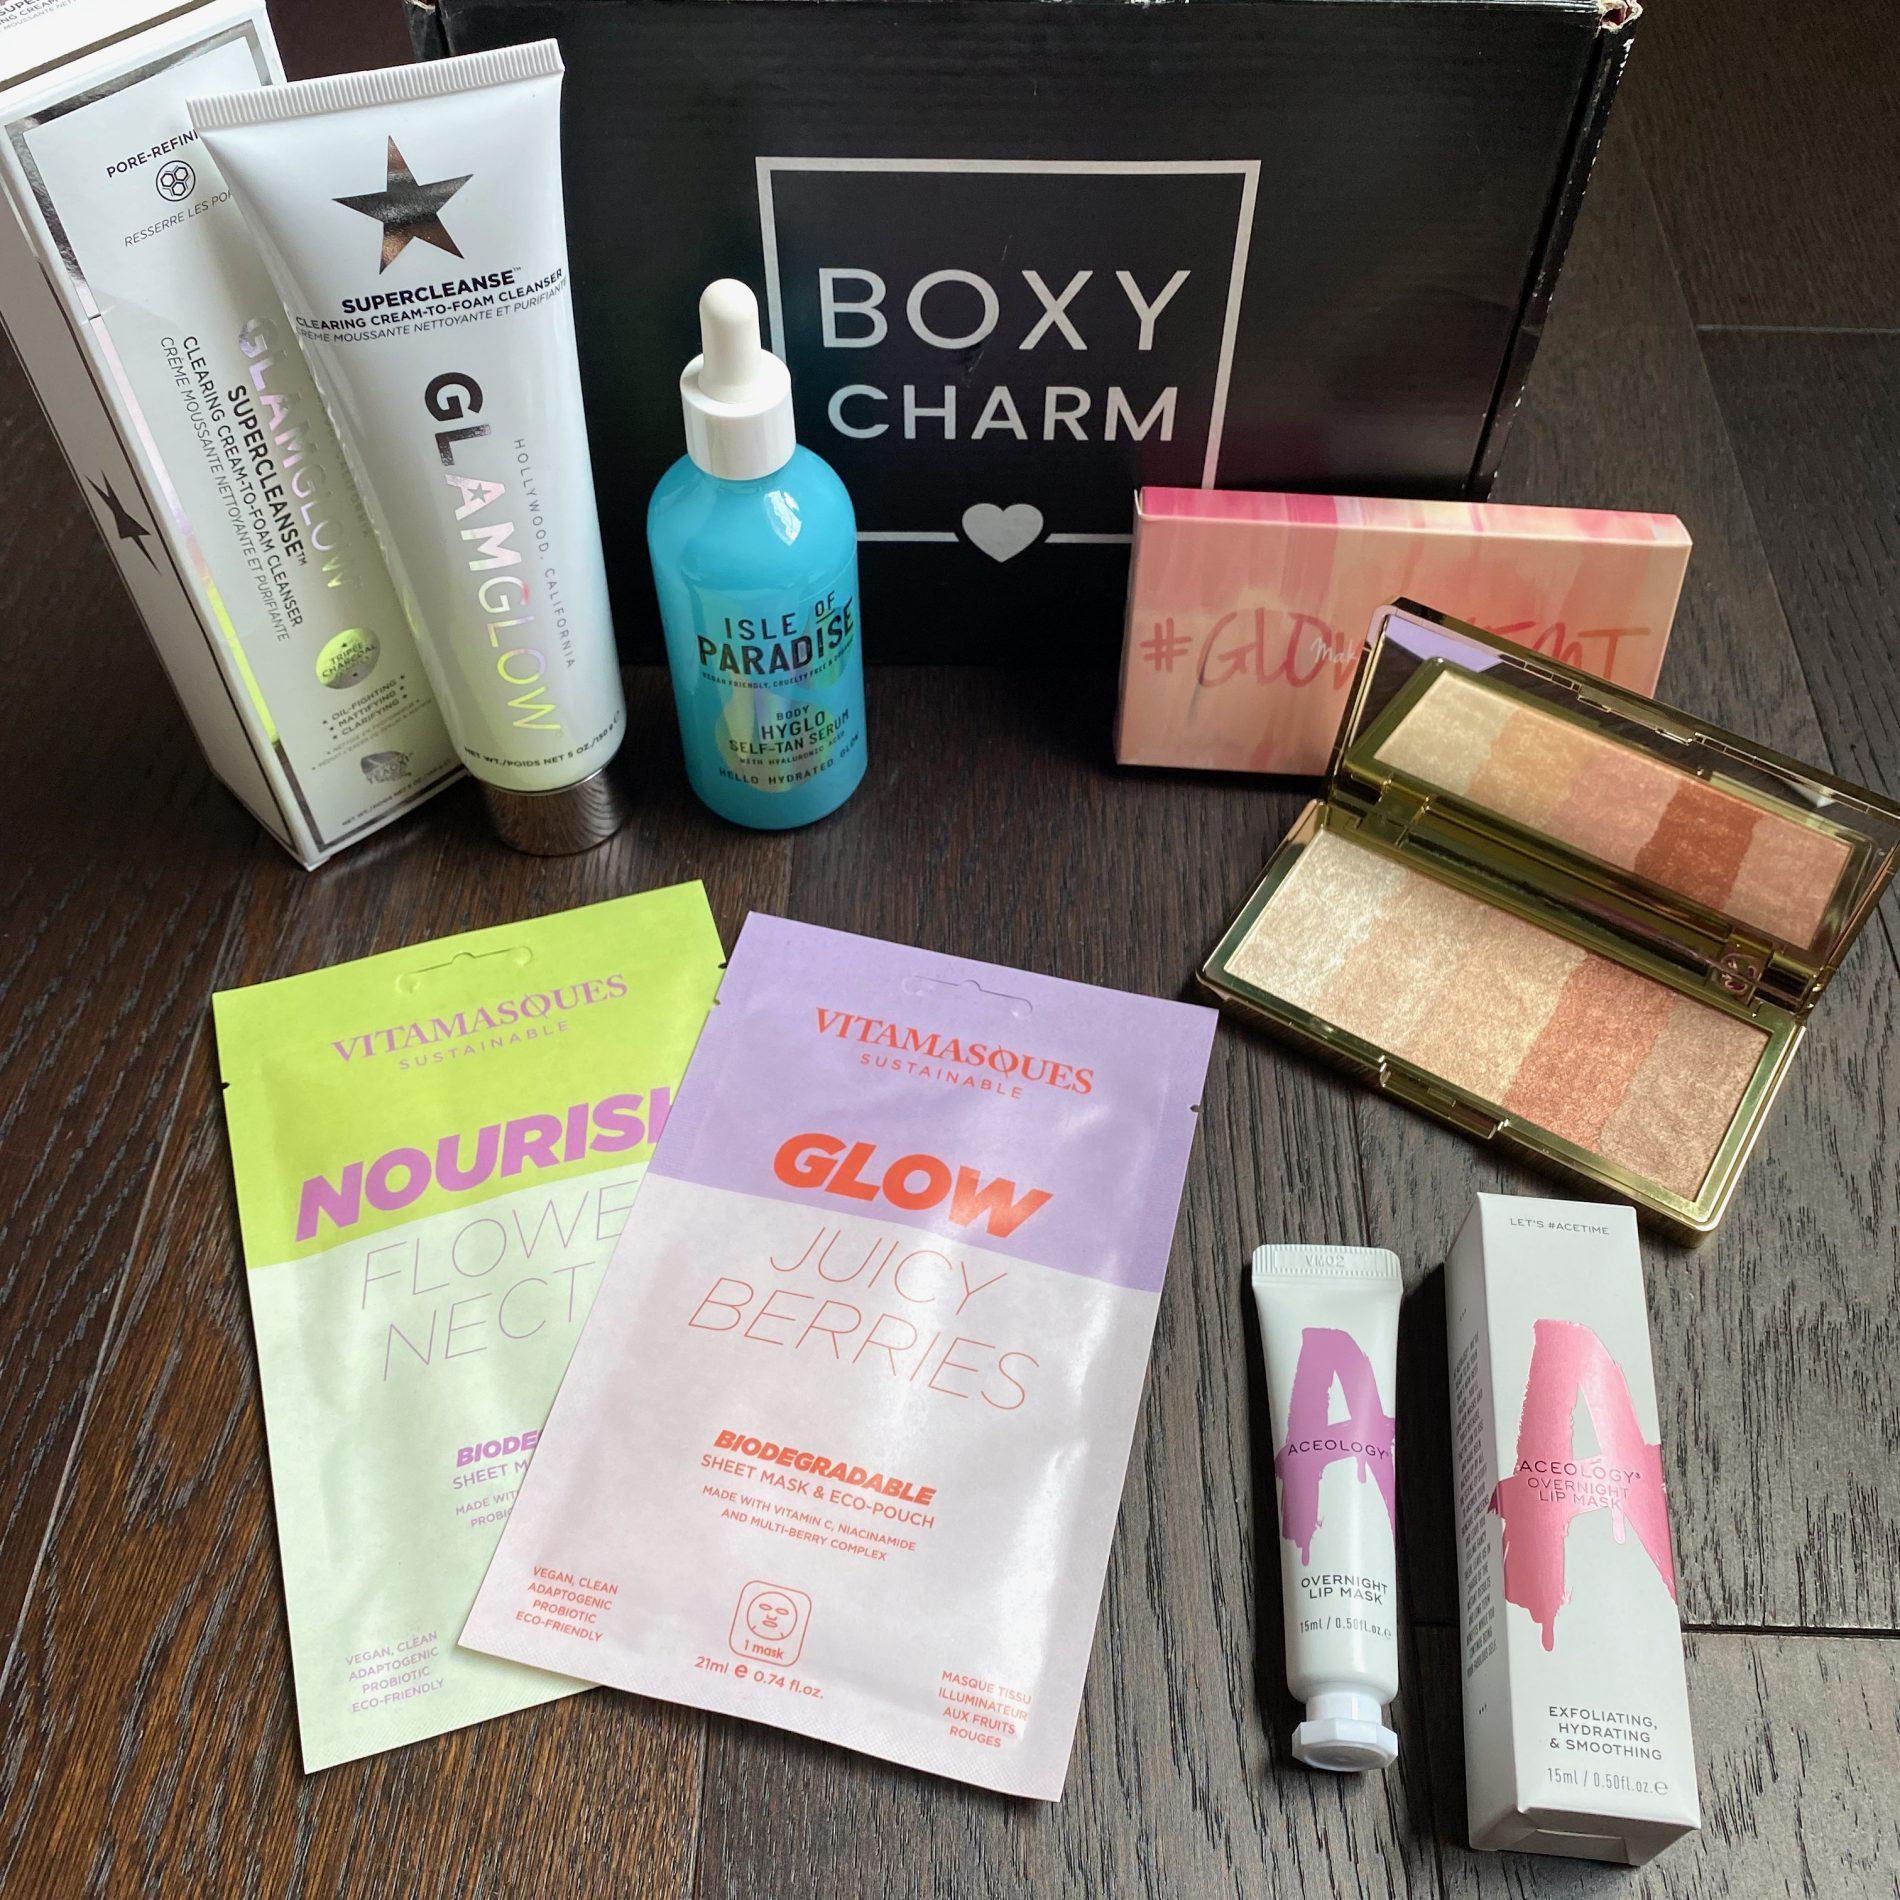 BOXYCHARM June 2021 Subscription Box Review + Coupon Code